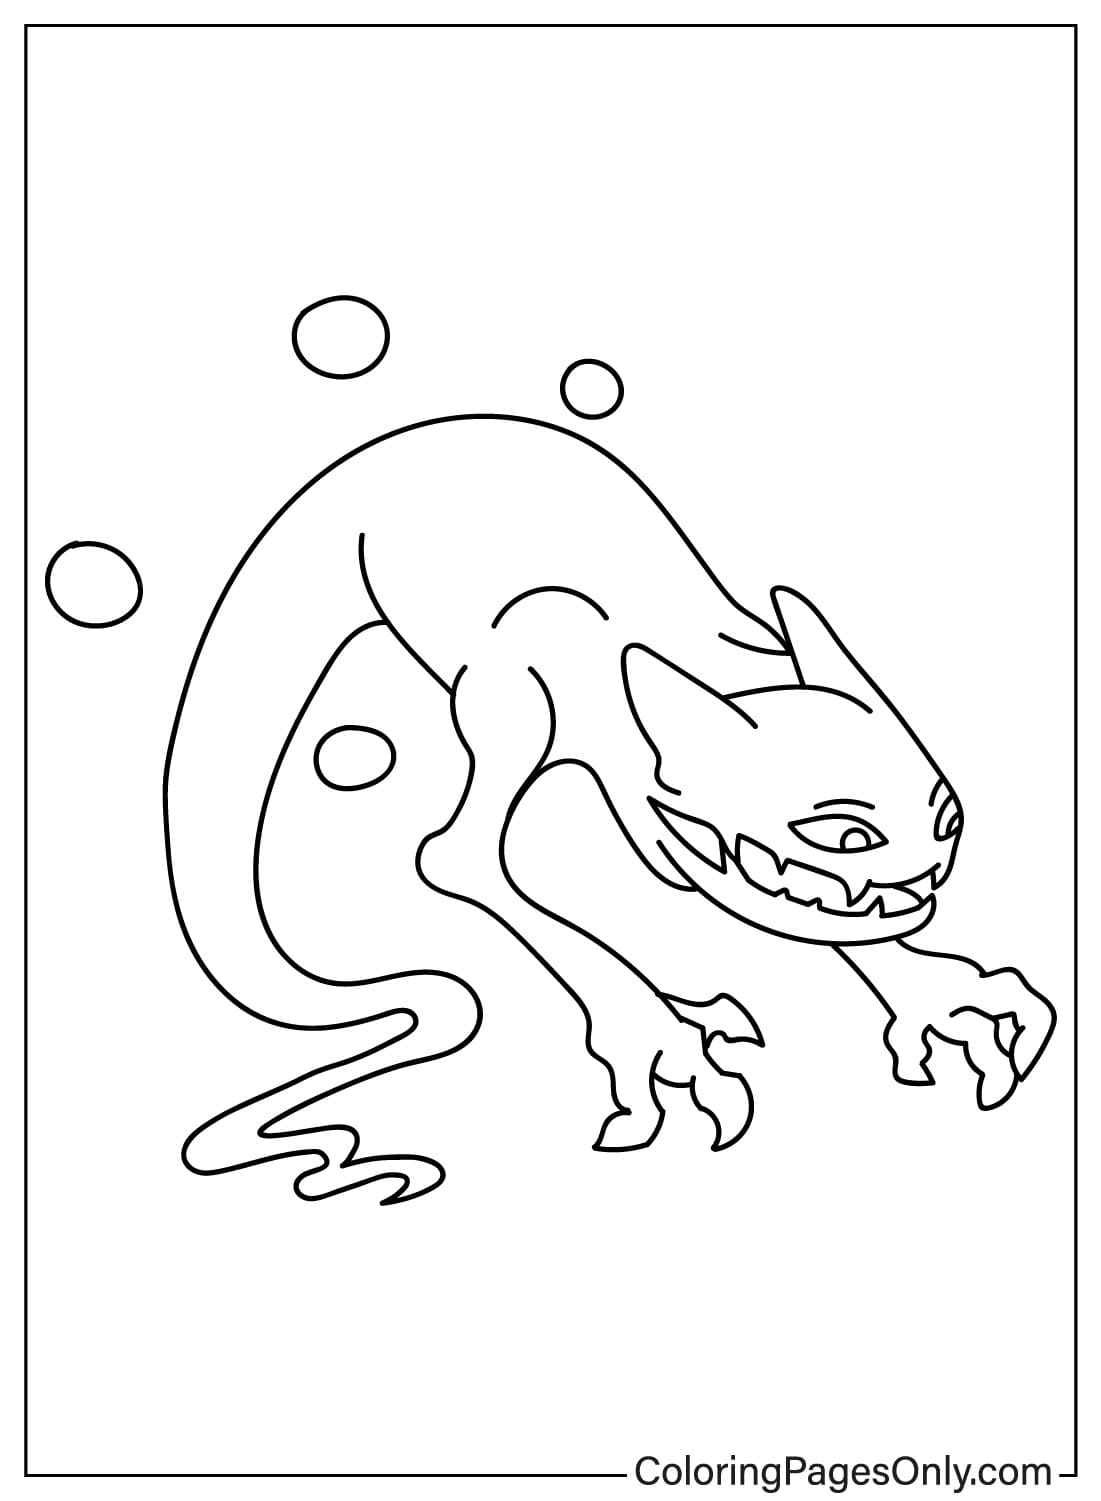 Ghazt Free Coloring Page from Ghazt